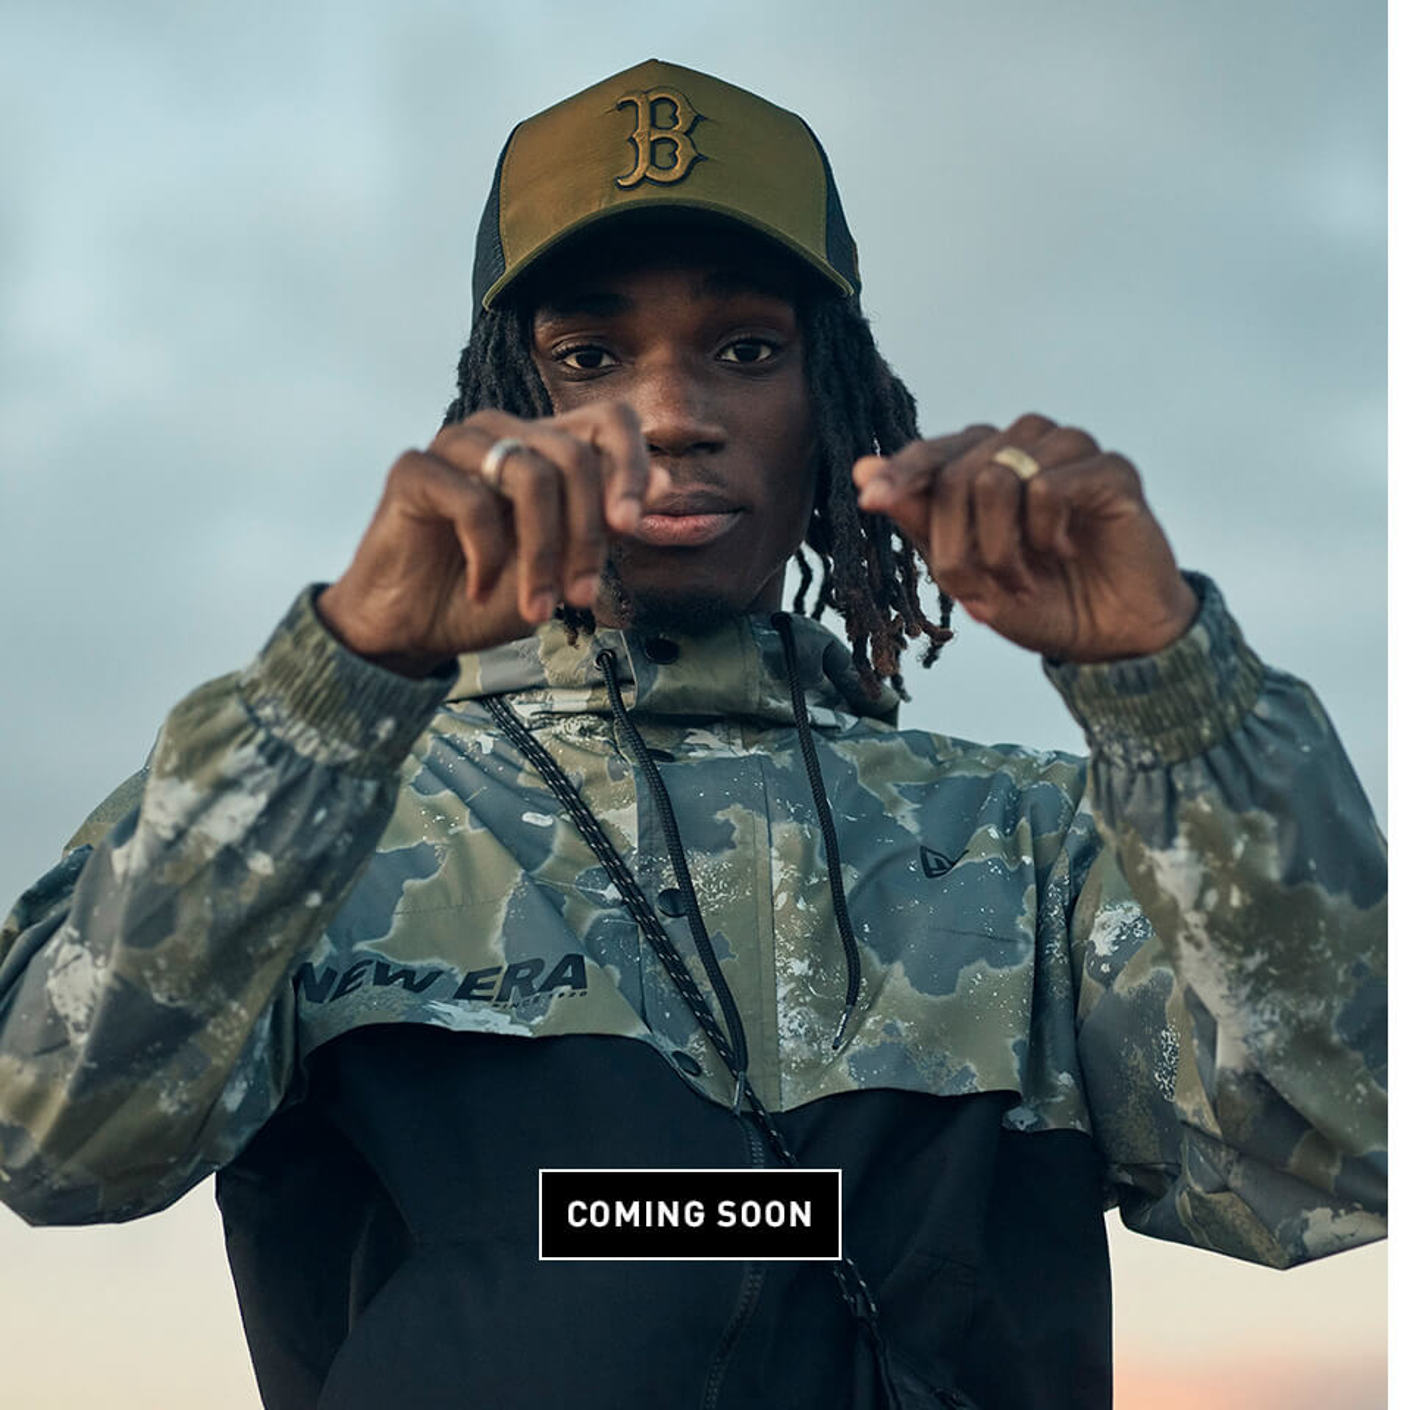 New season caps, hats and clothing for Spring 2021 by New Era. Available soon.